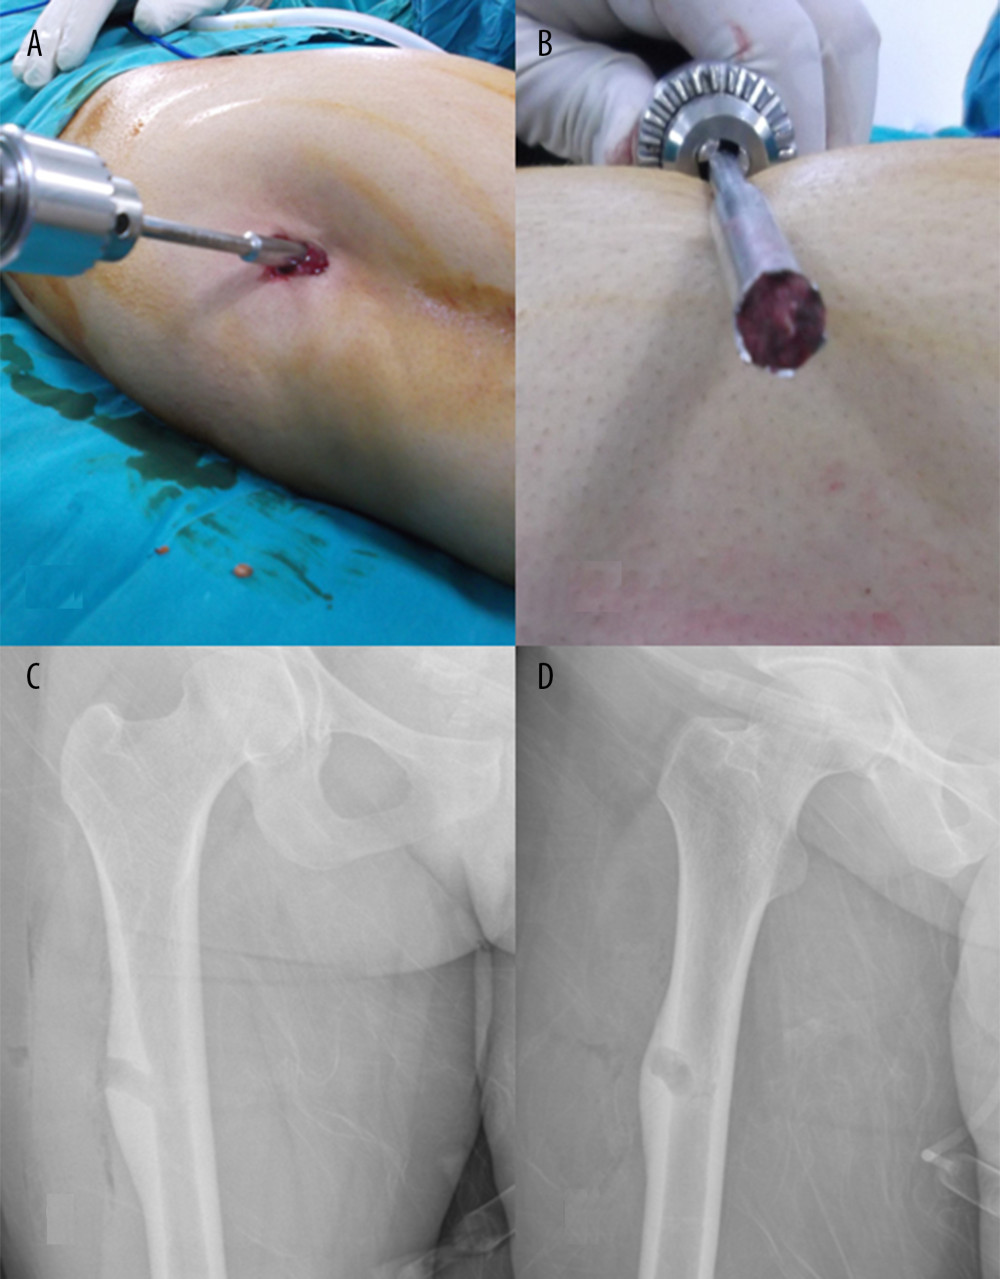 (A–D) After the nidus was marked with guidewire, it was removed with a trephine. Post-procedure radiographs show that the nidus has been excised.